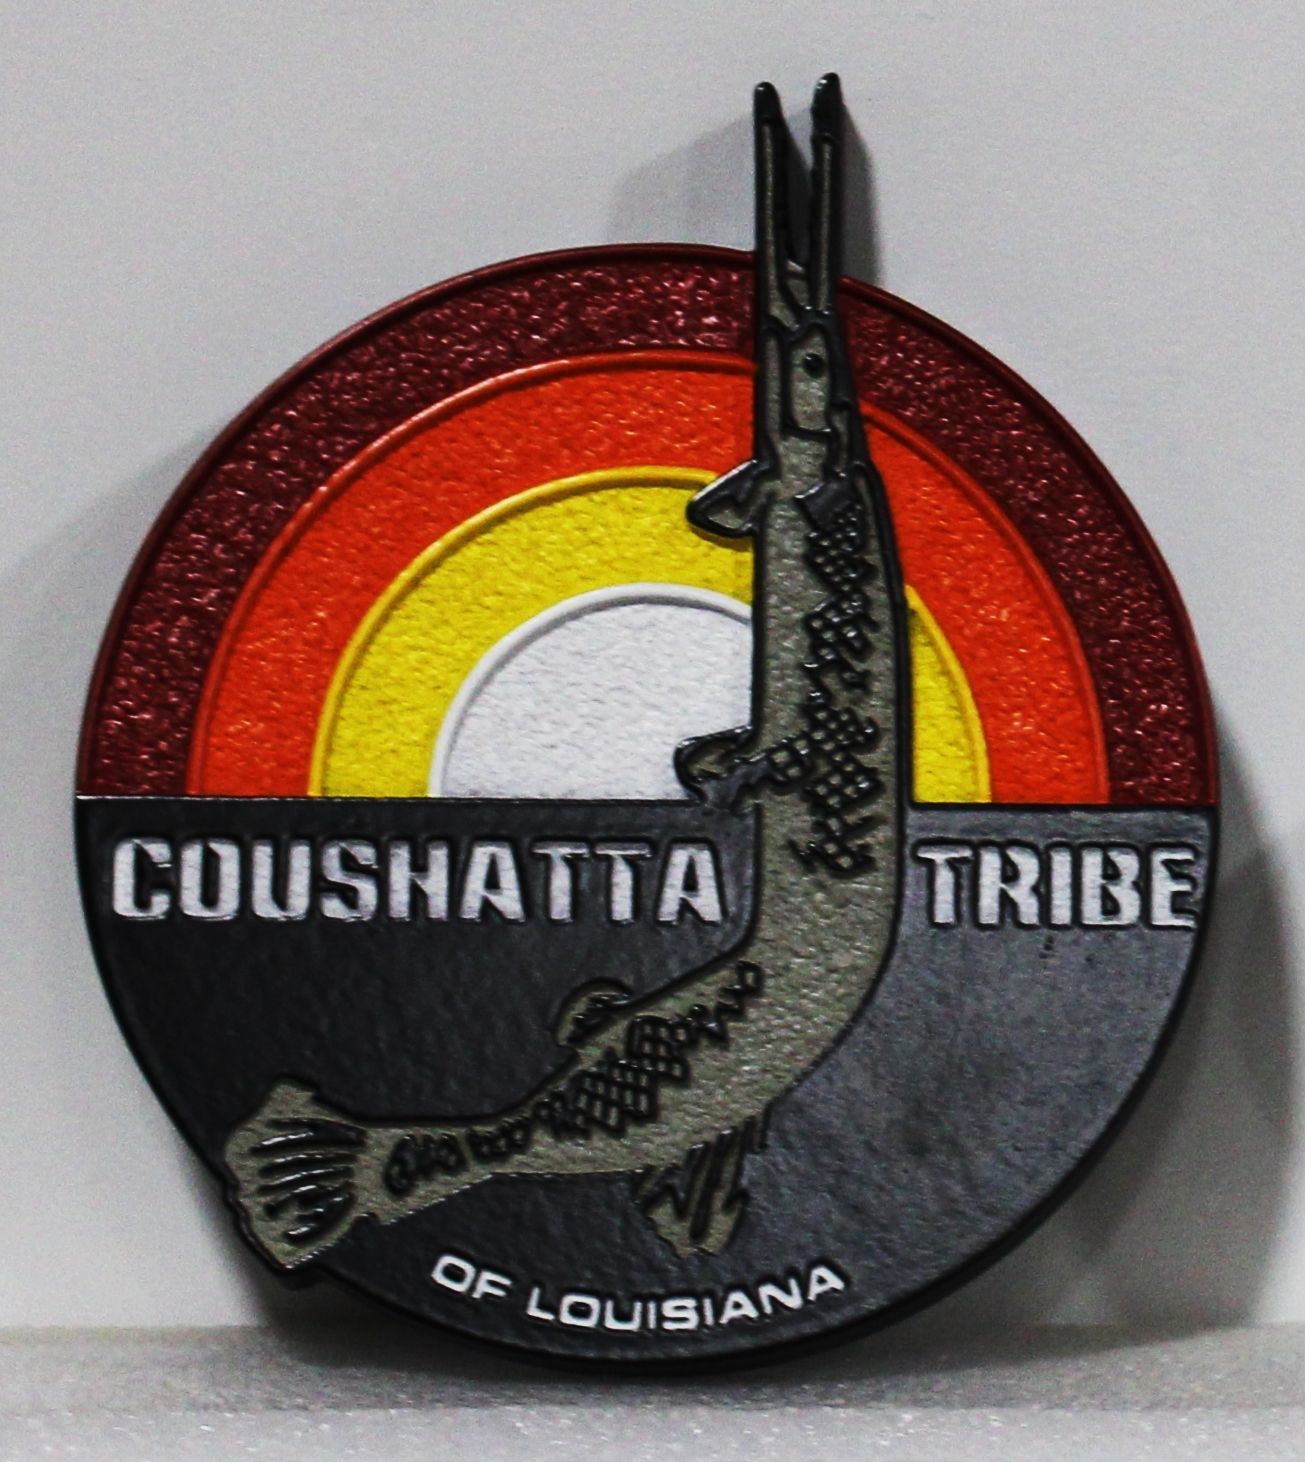 M22593 - Carved 2.5-D Multi-Level Raised   Relief HDU  sign for the Coushatta Tribe of Louisiana